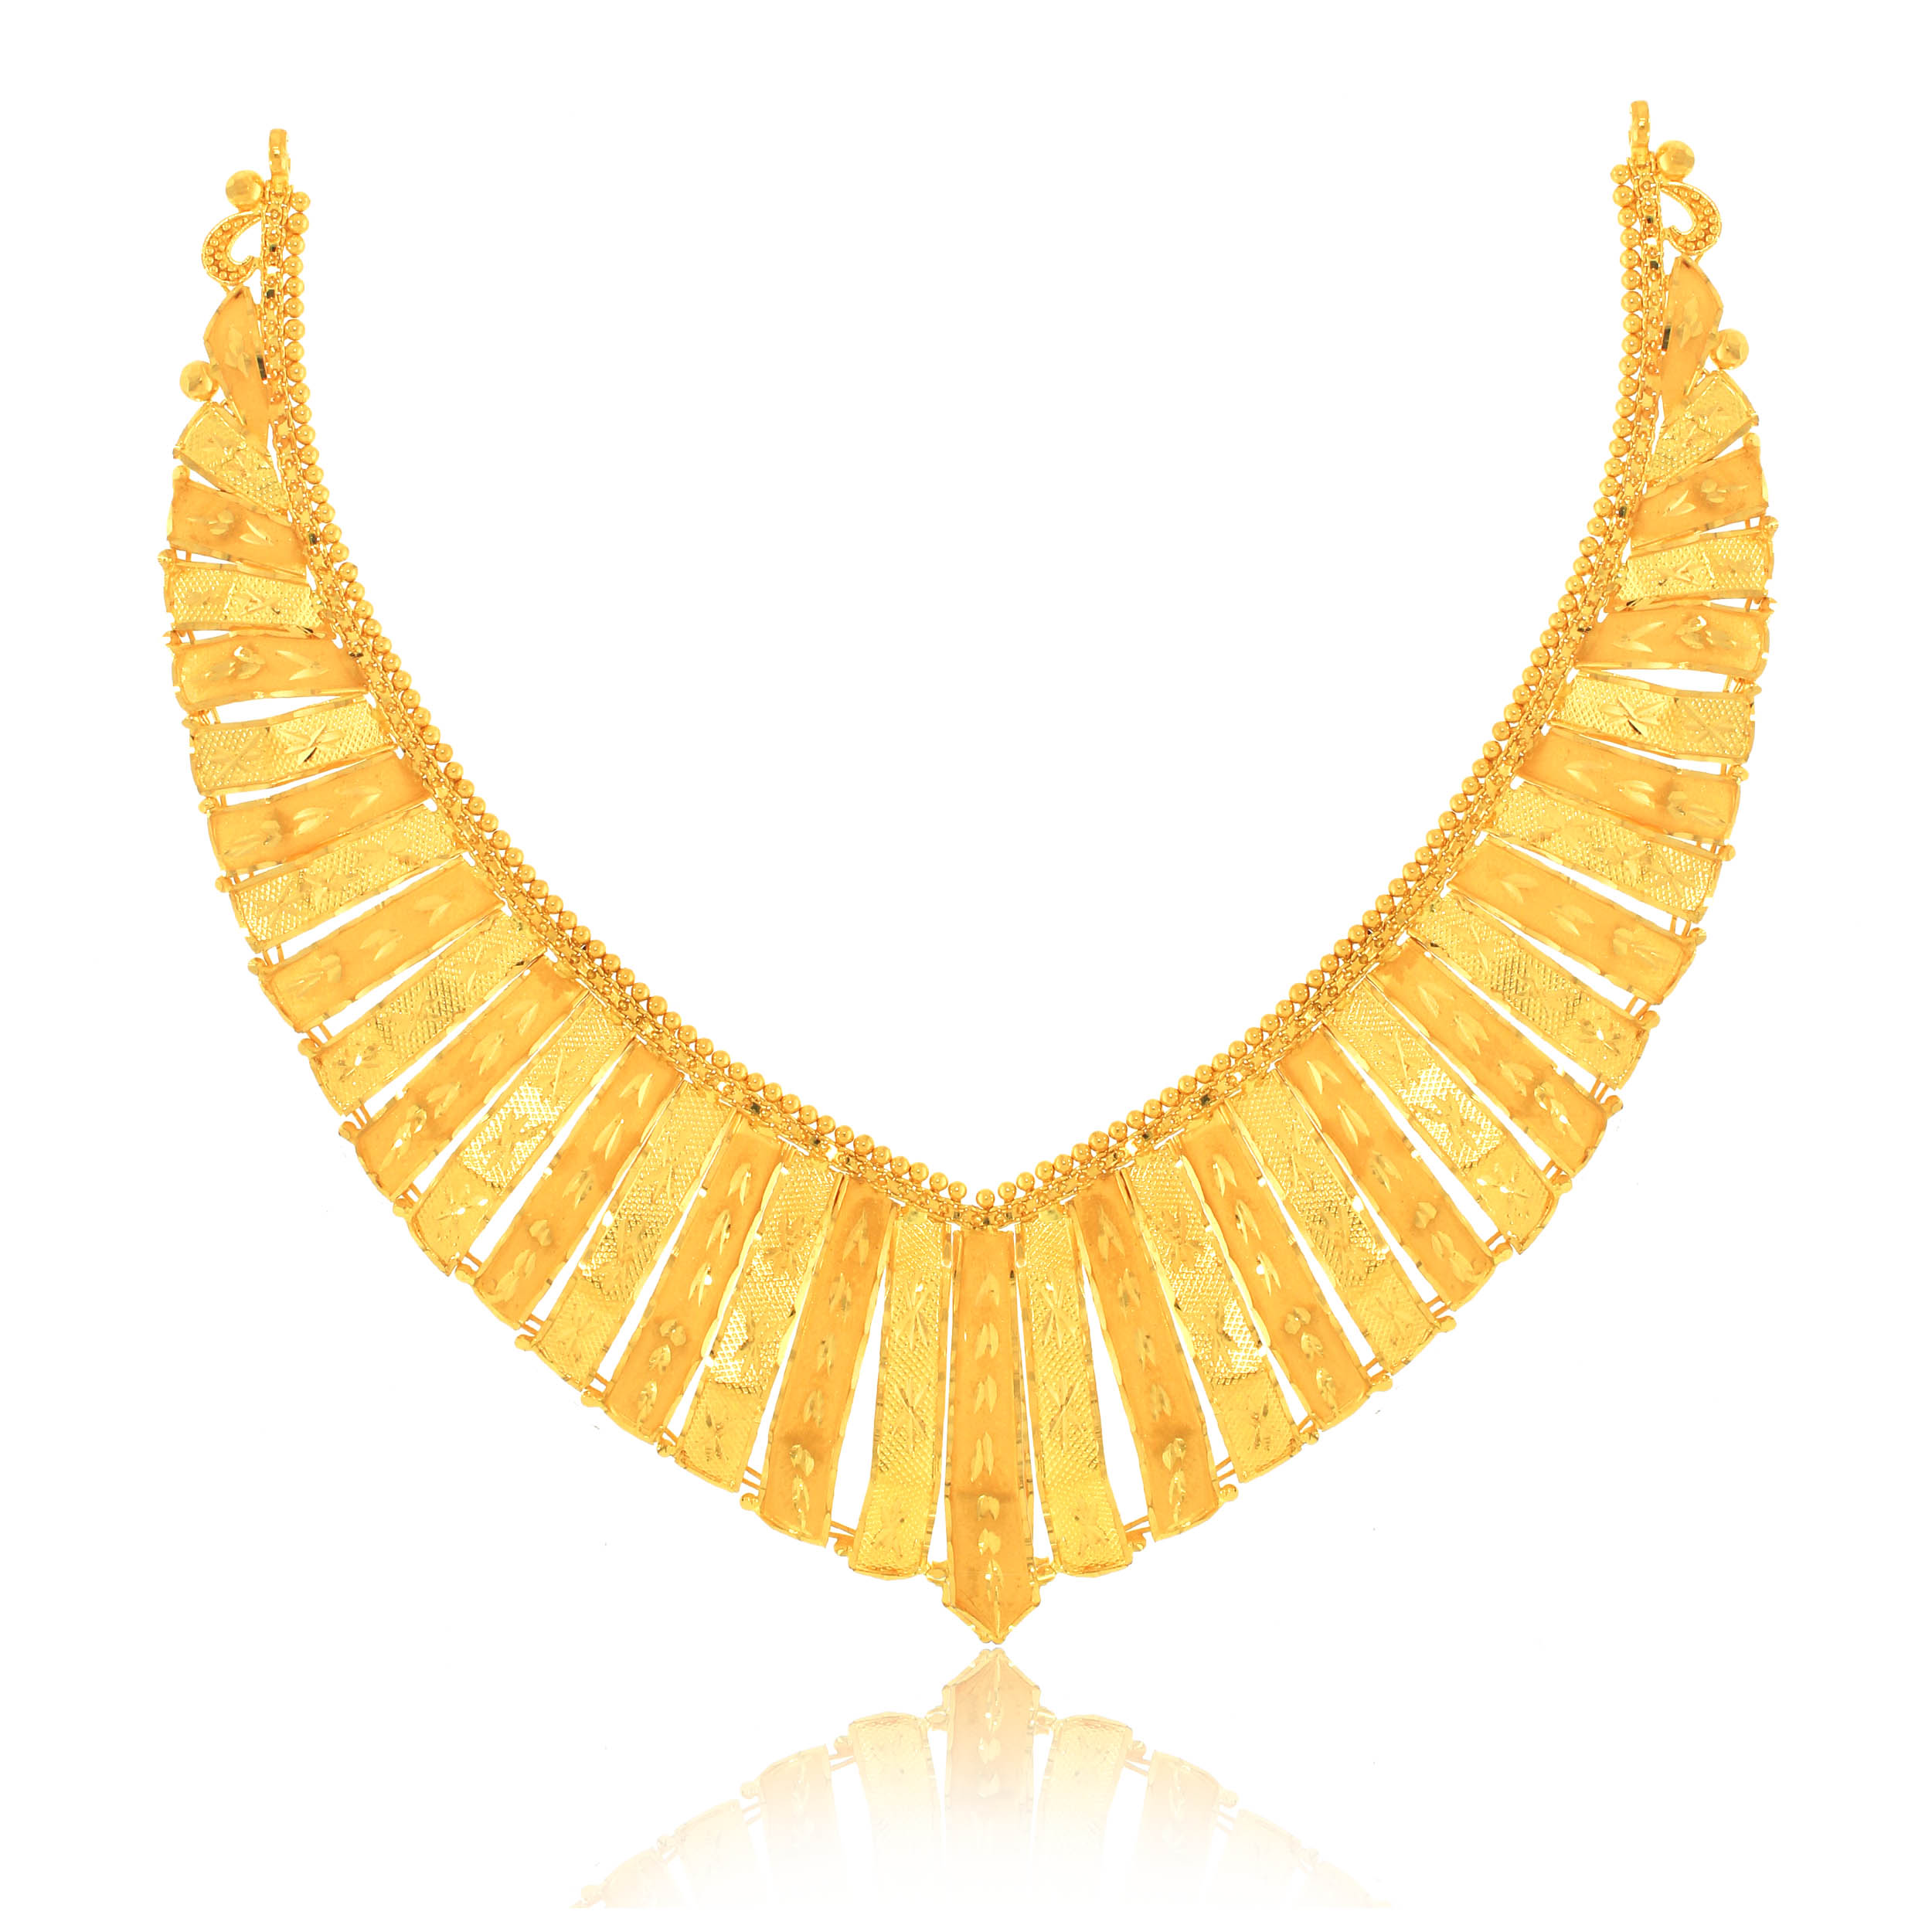 REKHA AABI JEWELS 22CT BIS HALLMARK GOLD  NECKLACE FOR WOMAN